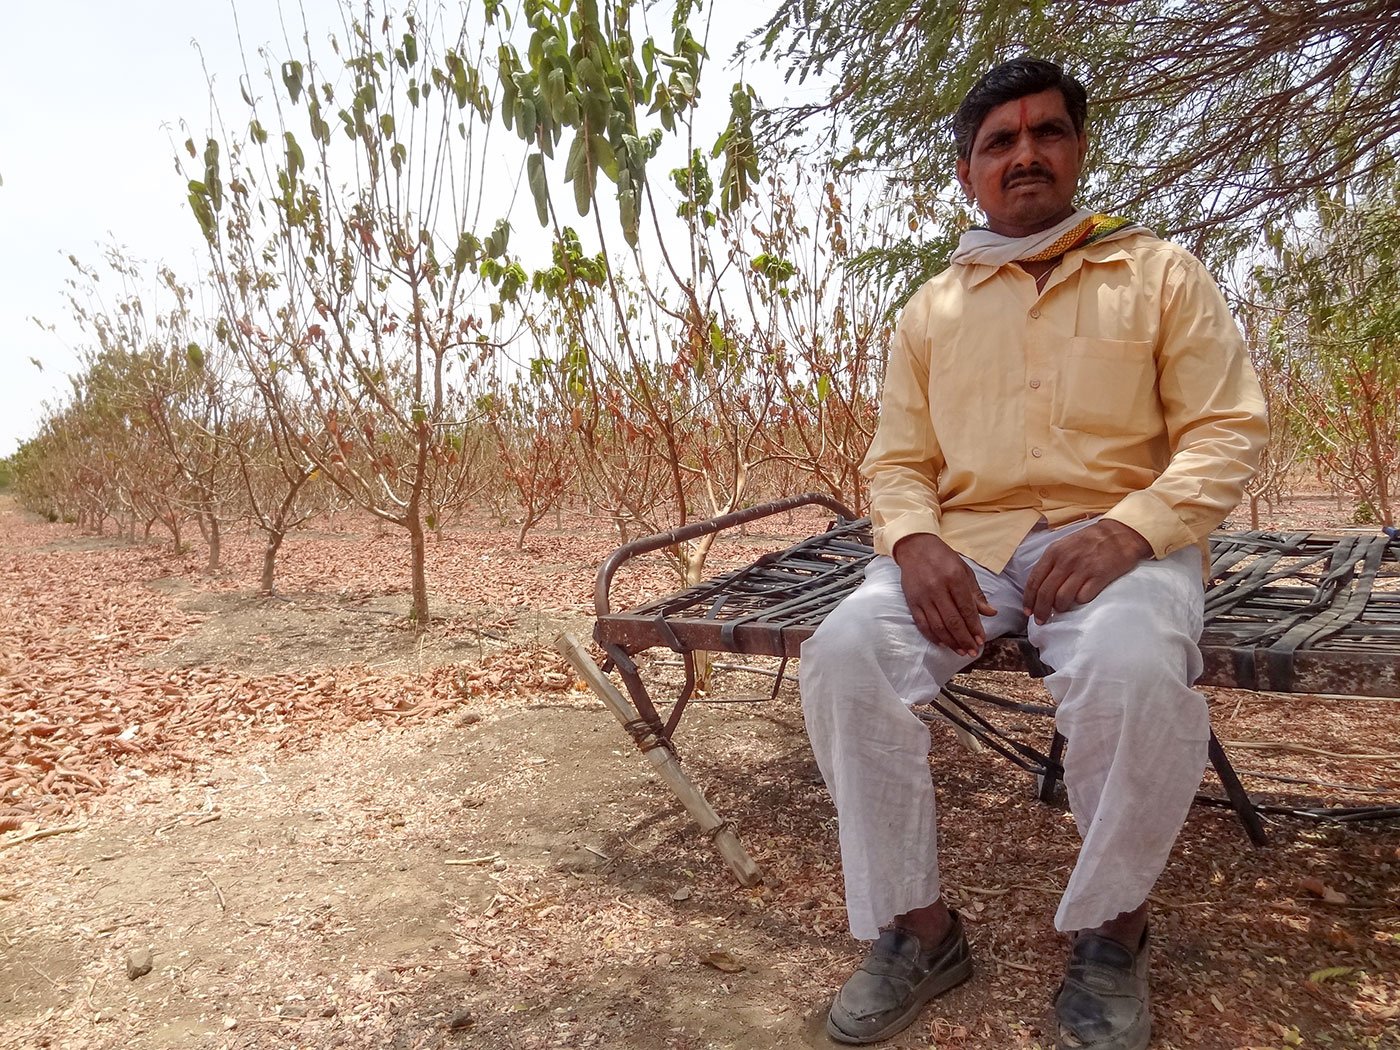 Prahlad Dhoke sits against the backdrop of his dying orchard in the middle of his arid farm; he says he spends hours every day to tend to his farm